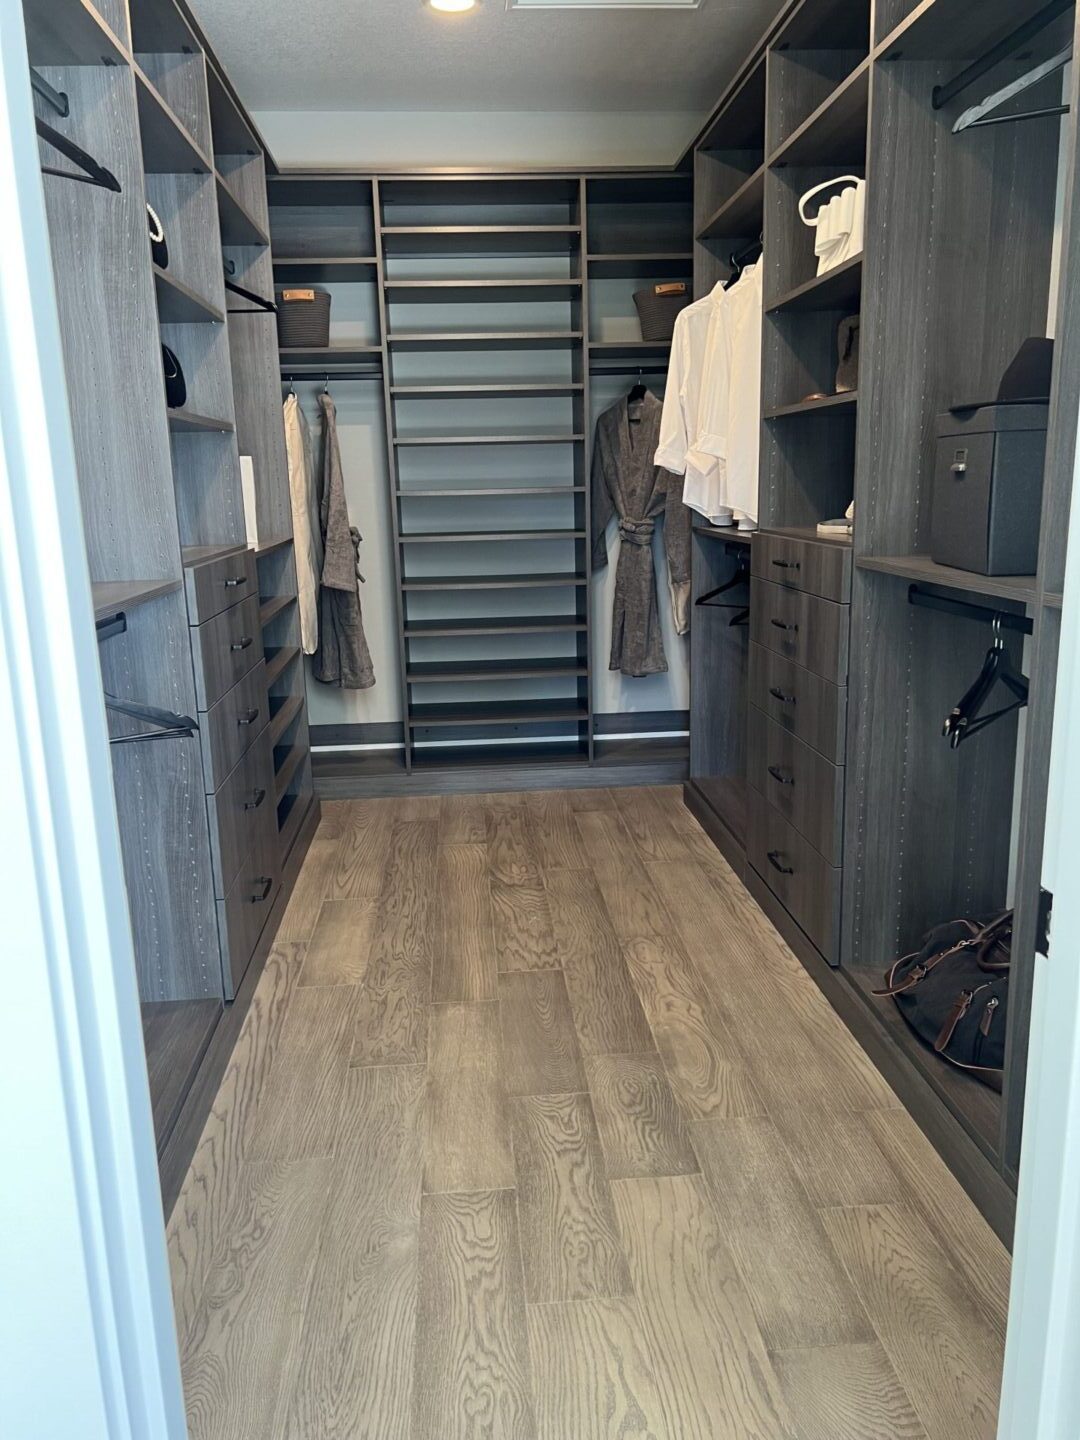 A master bedroom closet with built-in cabinetry.